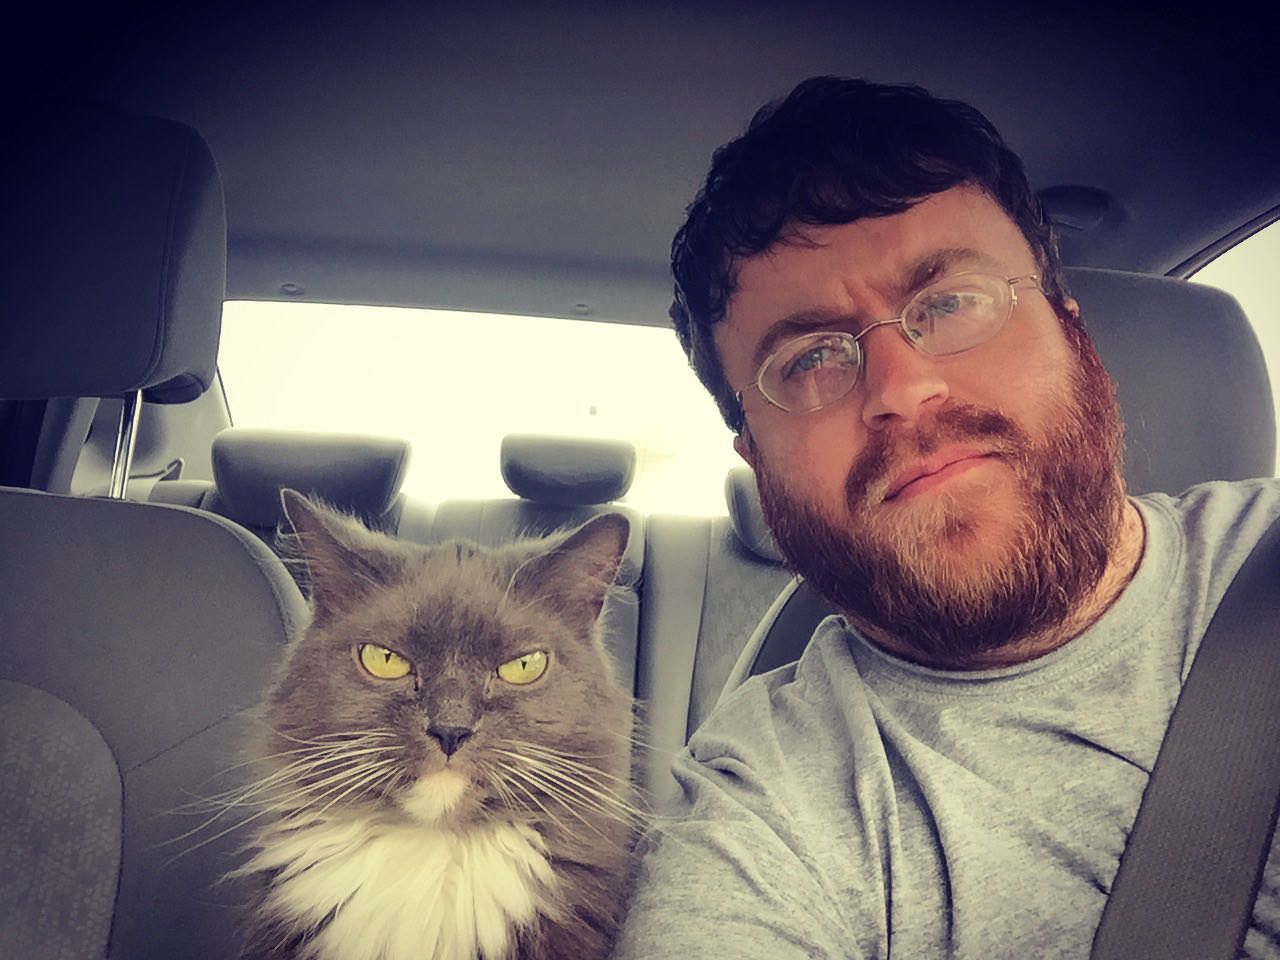 My cat and I enjoy driving around town and disapproving of everyone we see.